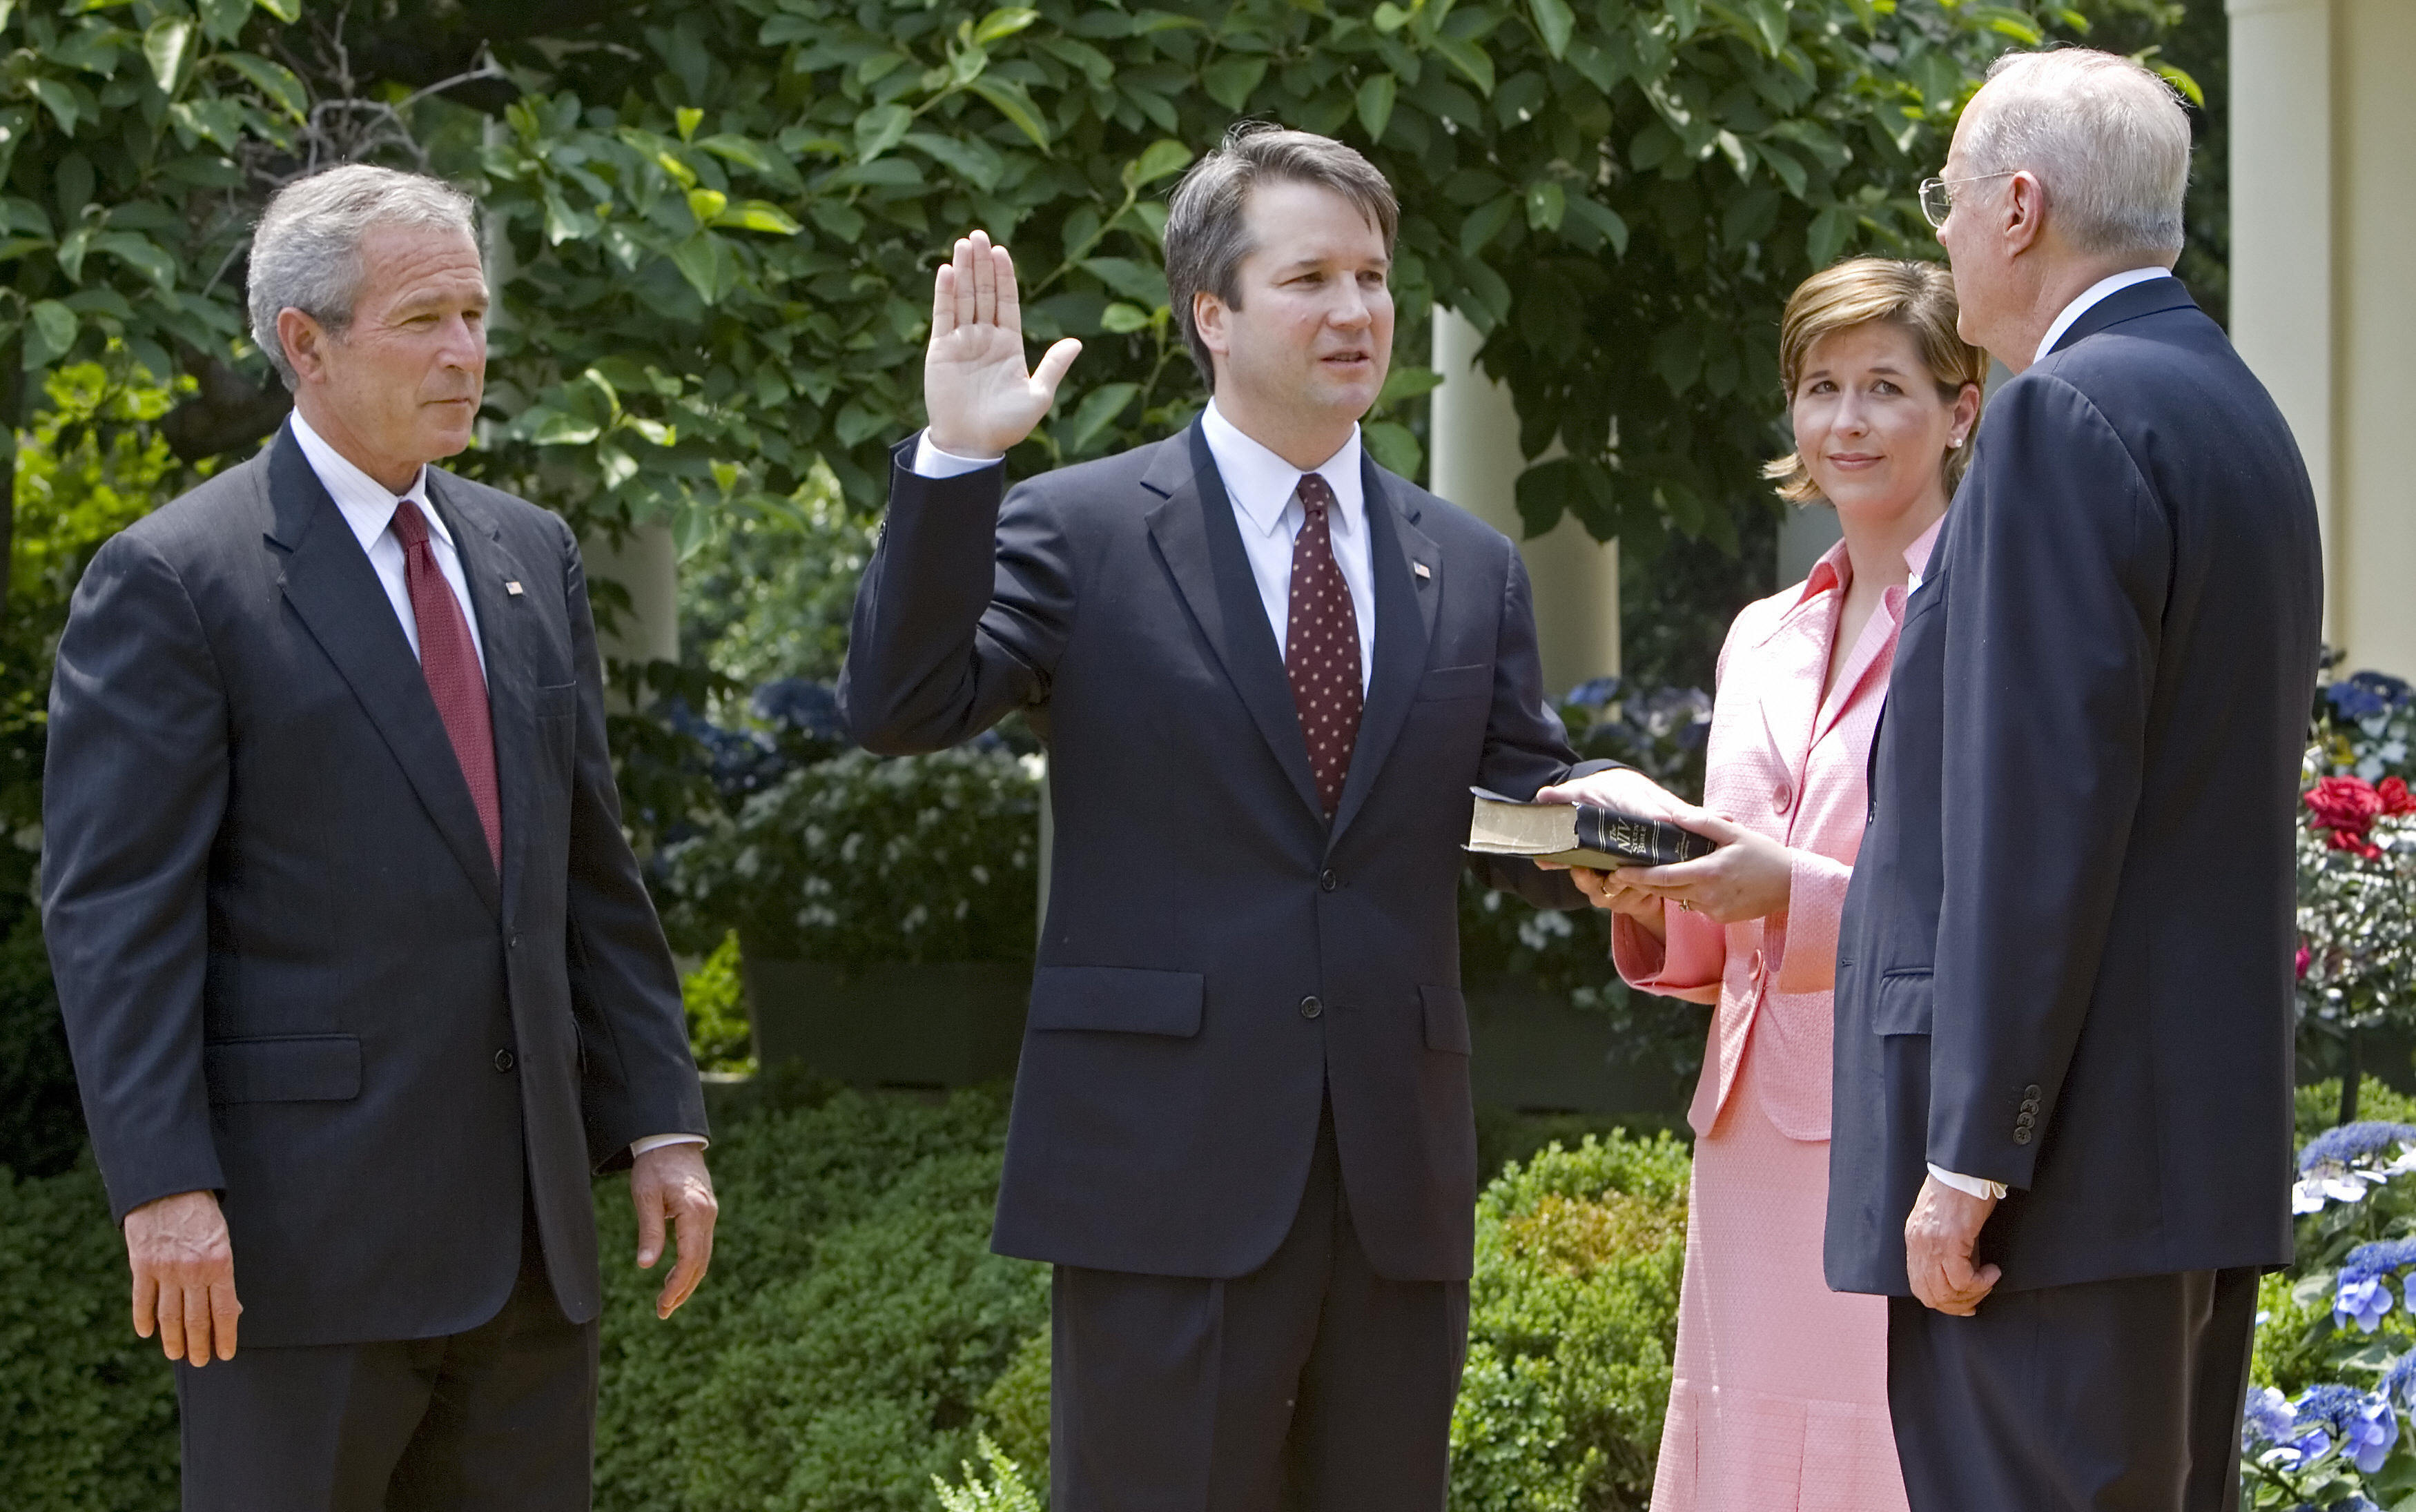 Brett Kavanaugh is sworn in as a federal judge by Supreme Court Justice Anthony Kennedy in 2006. President George W. Bush looks on. Kavanaugh is Trump's pick to replace Kennedy on the Supreme Court. (Photo by Paul J. Richards/AFP/Getty Images)